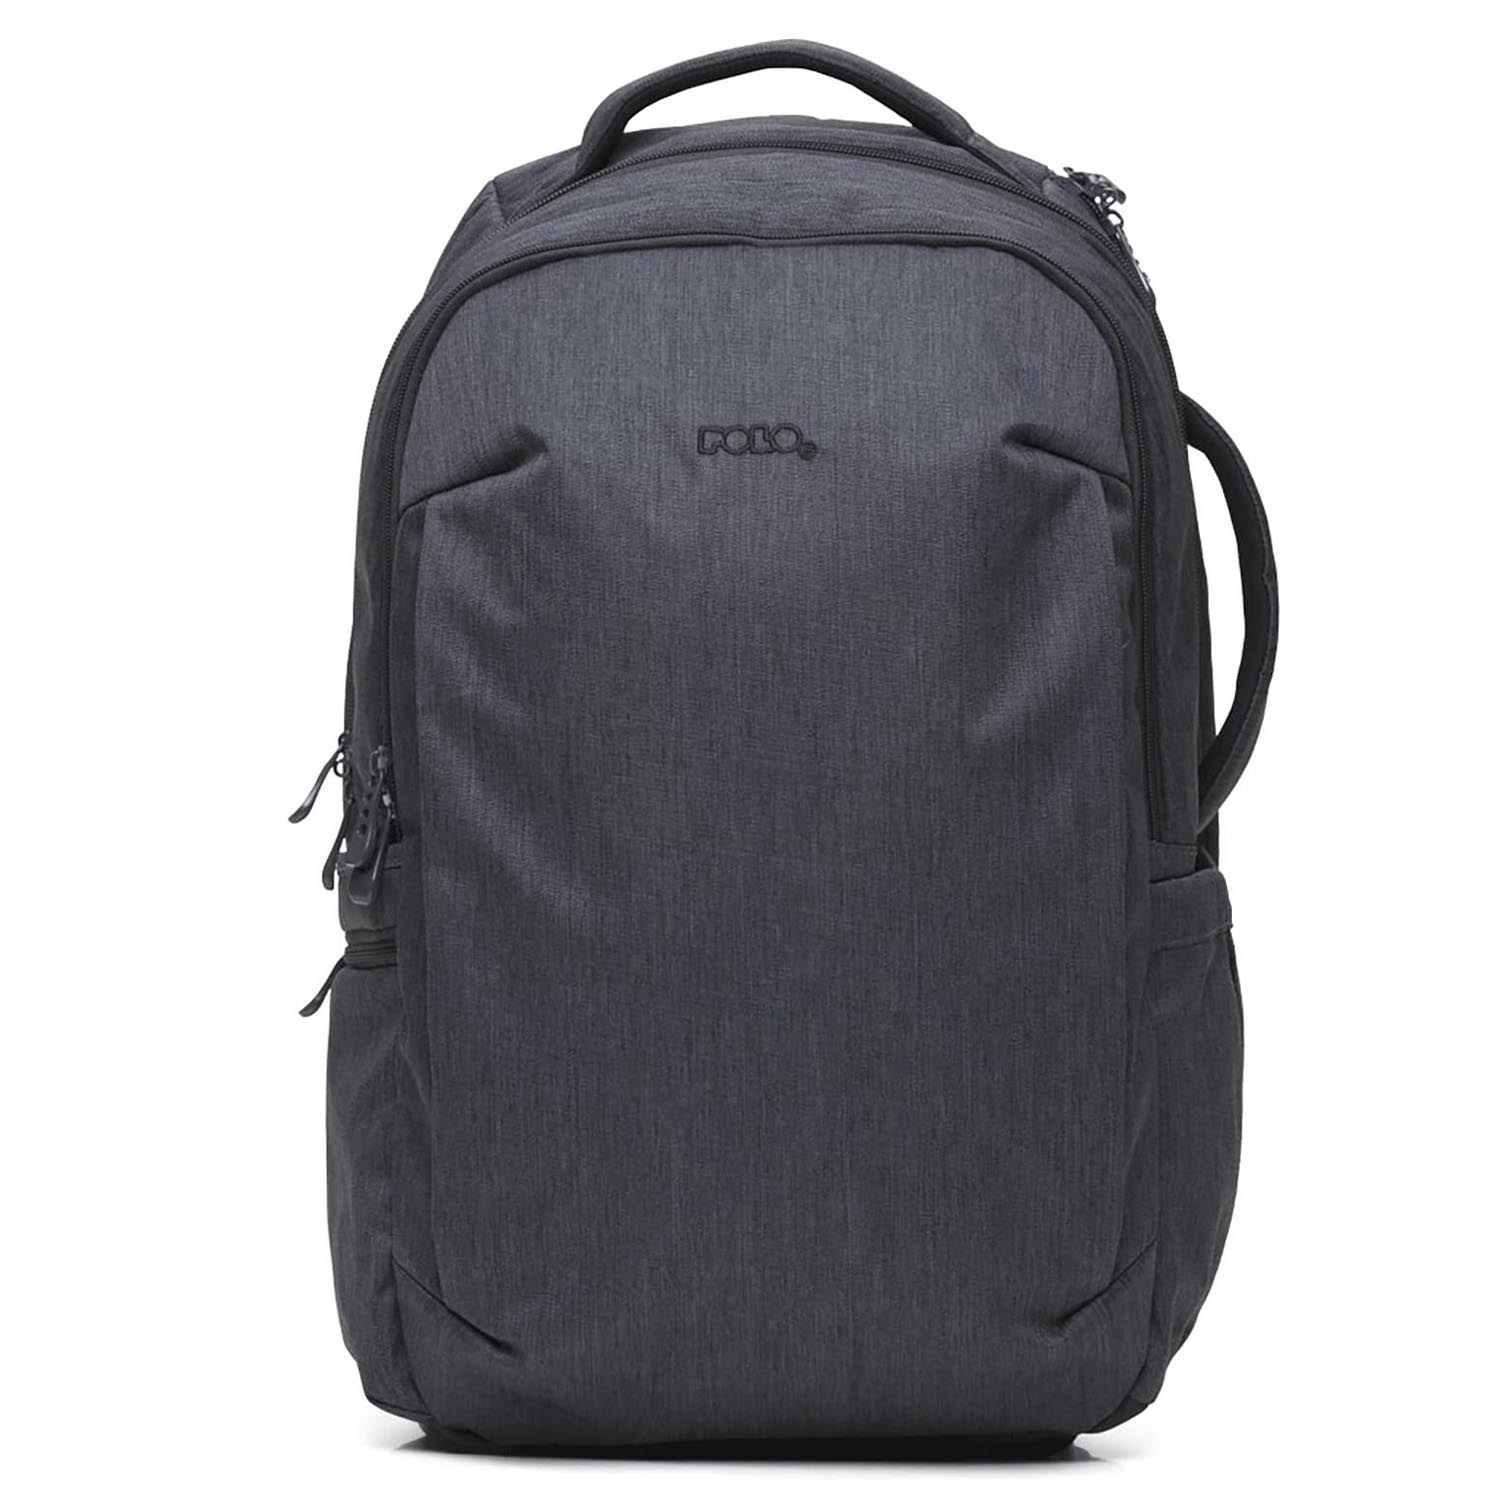 polo stric backpack grey 902021 2200